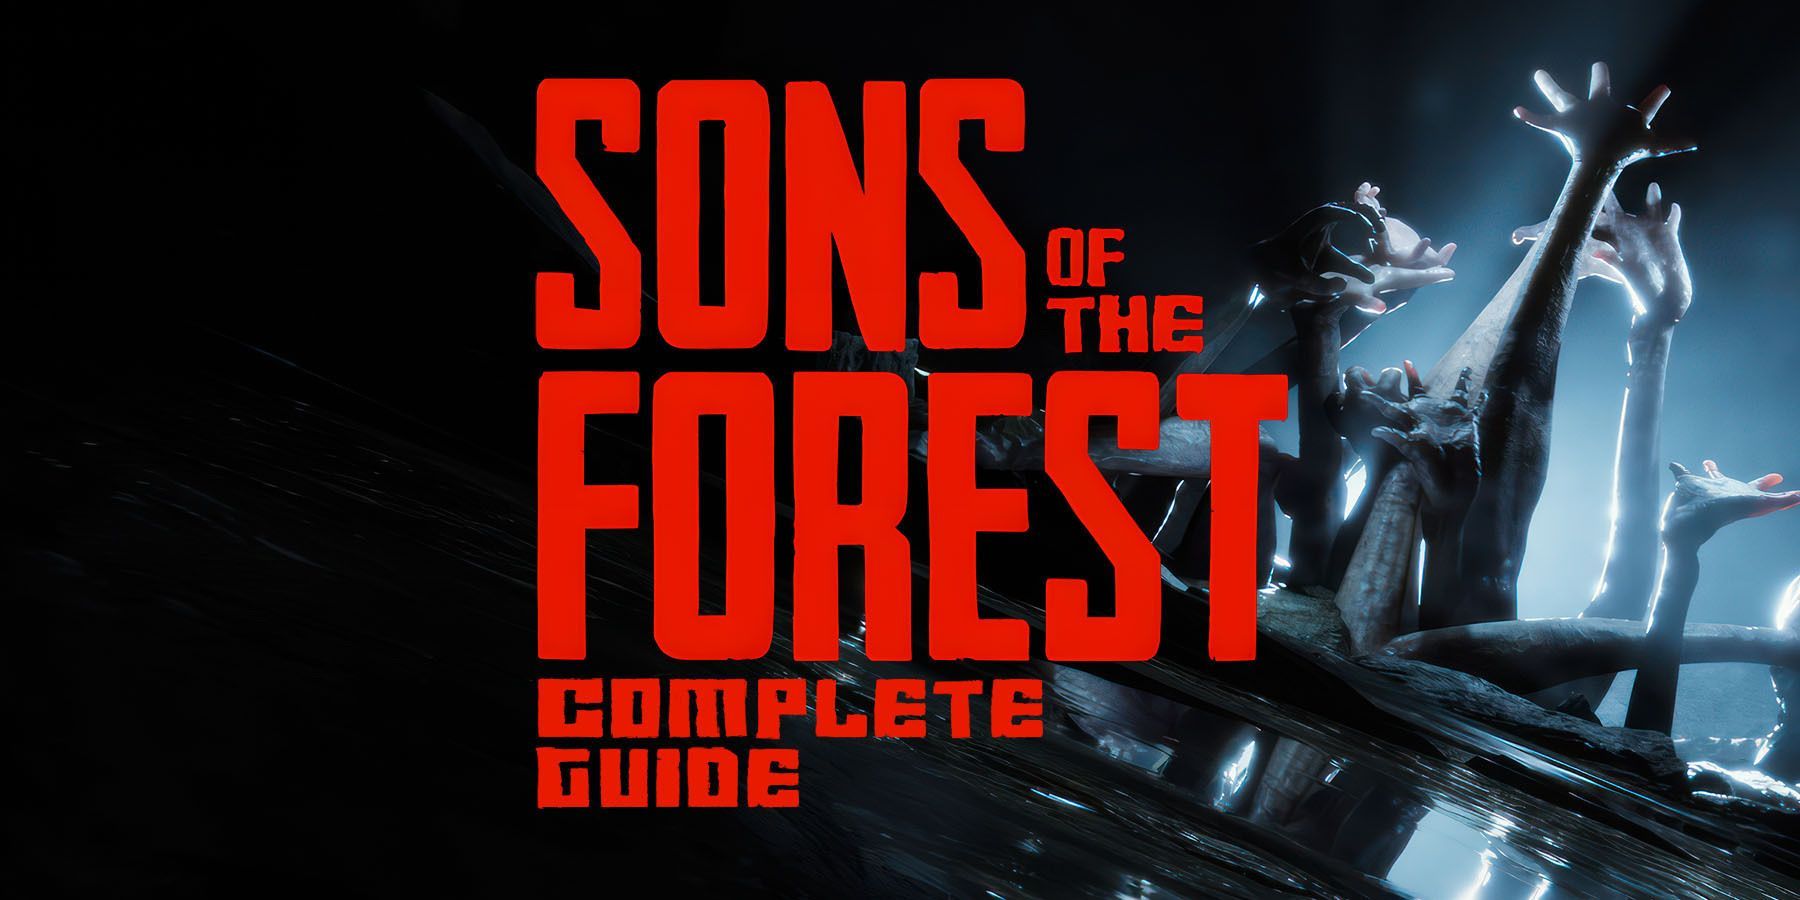 Sons of the Forest Gameplay Walkthrough - Intro and Acquiring the